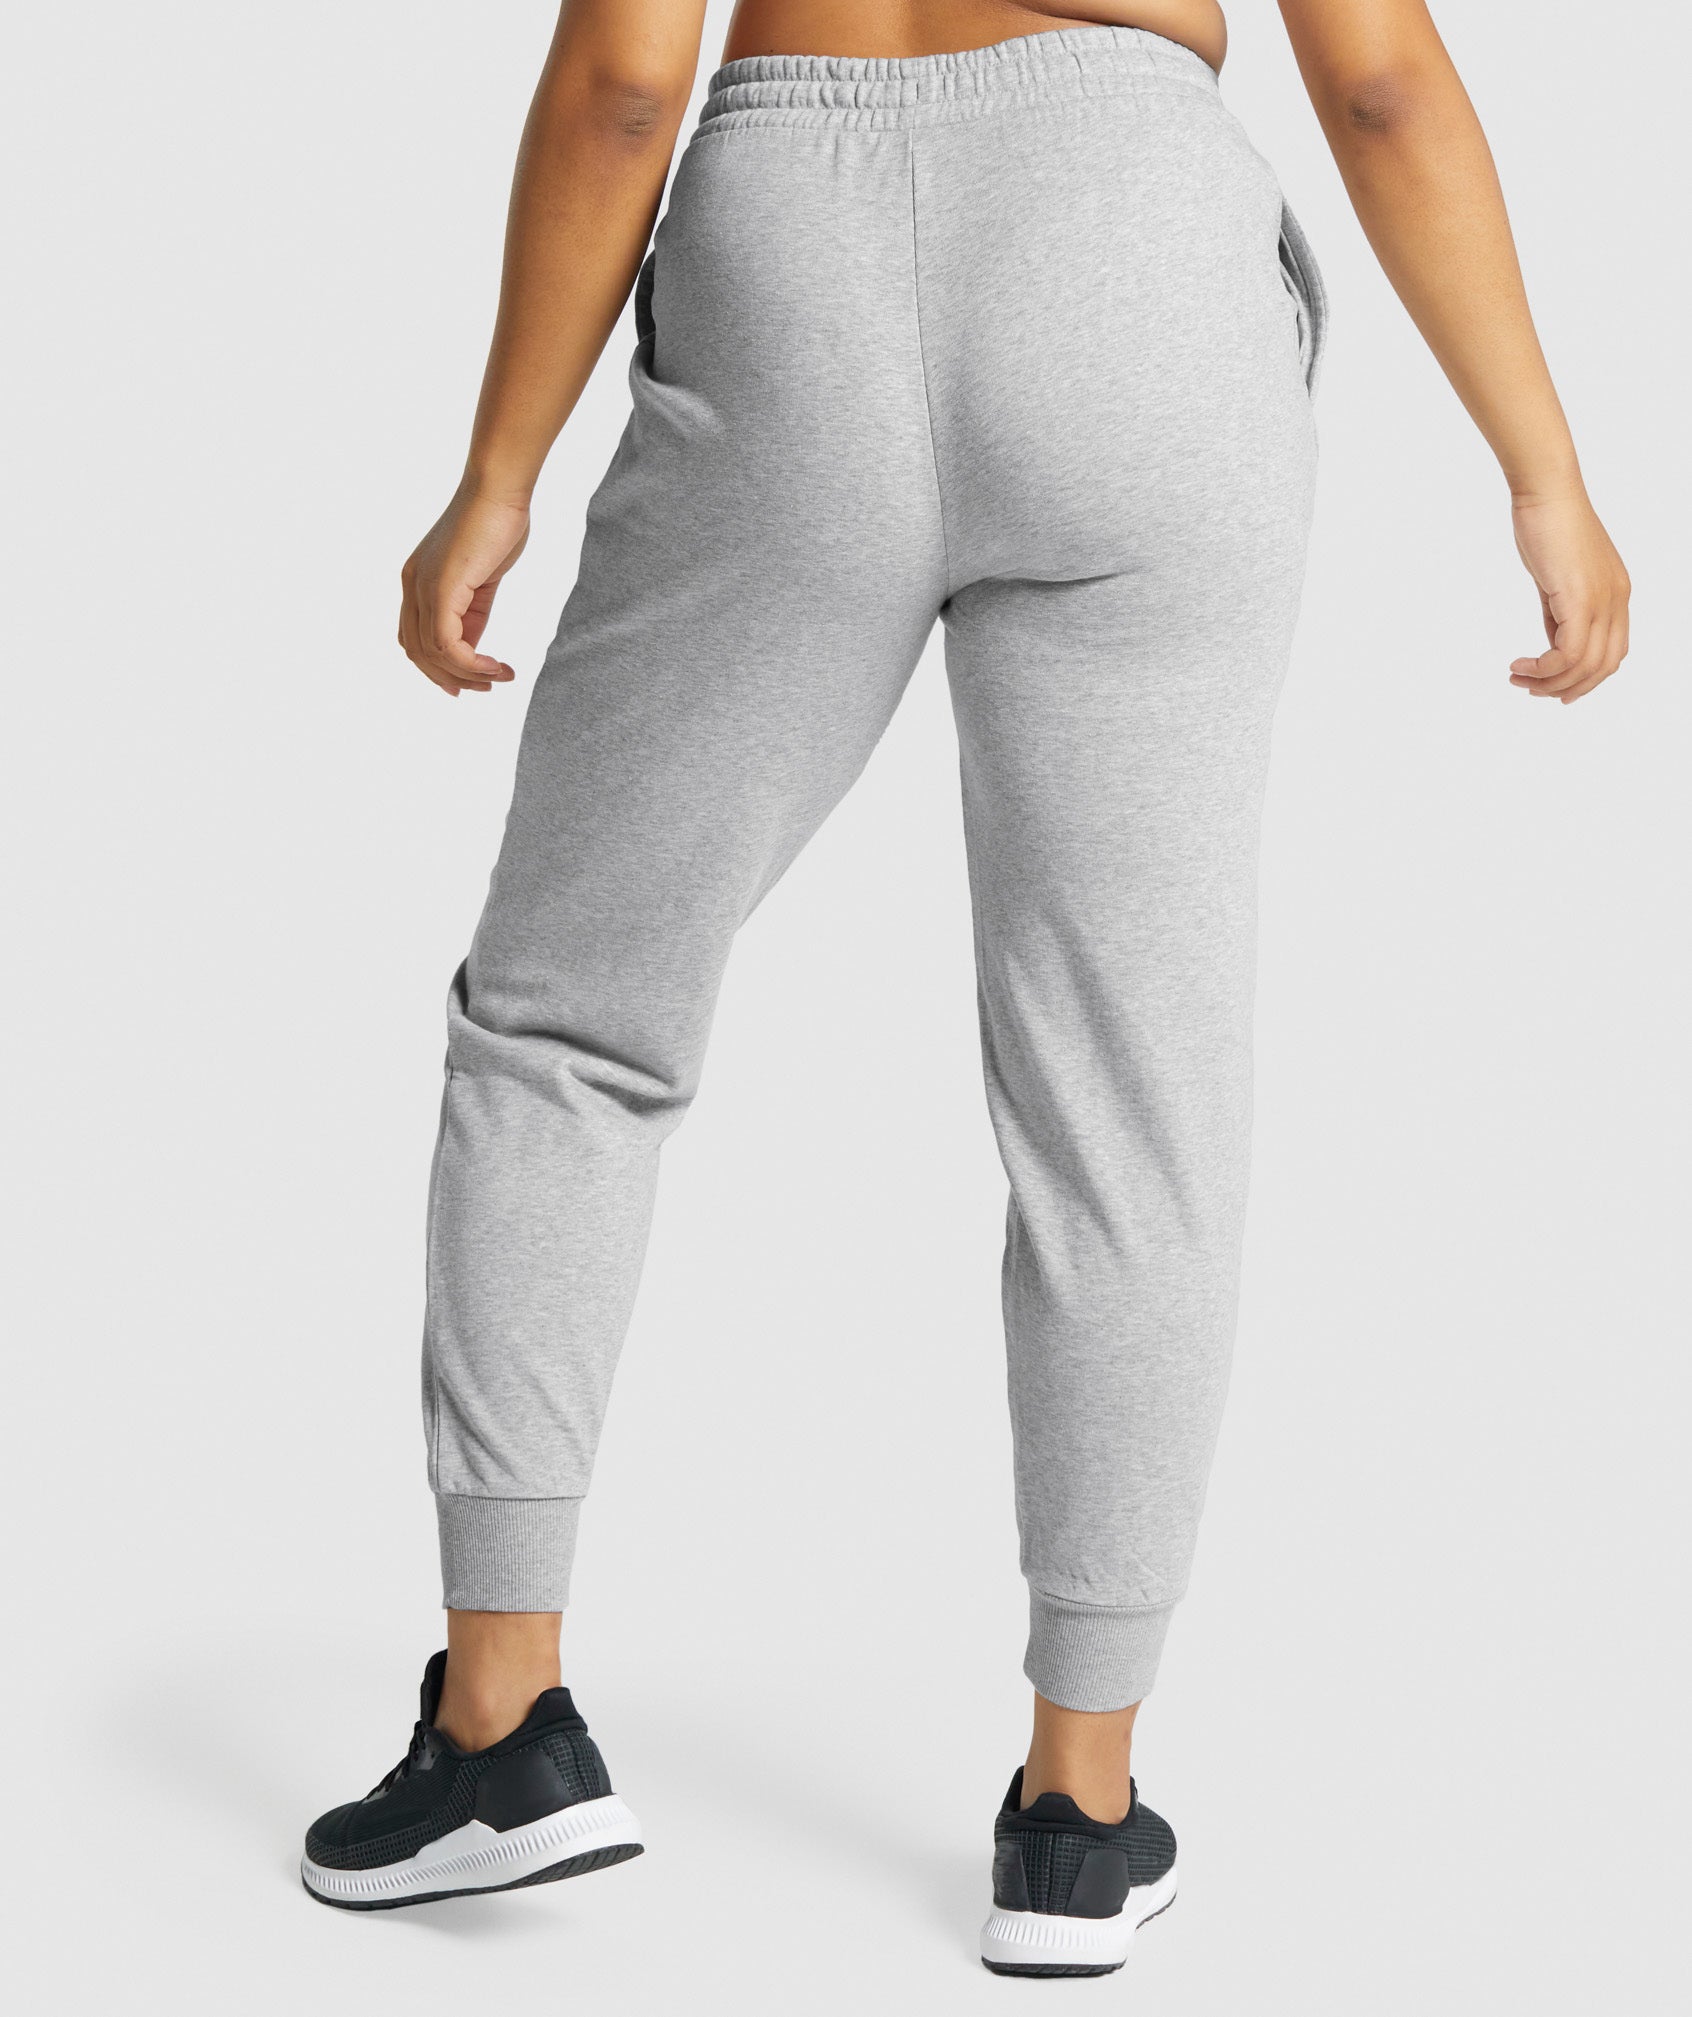 GYMSHARK Womens Joggers Gray Logo Sweatpants Ankle Zip Spell Out